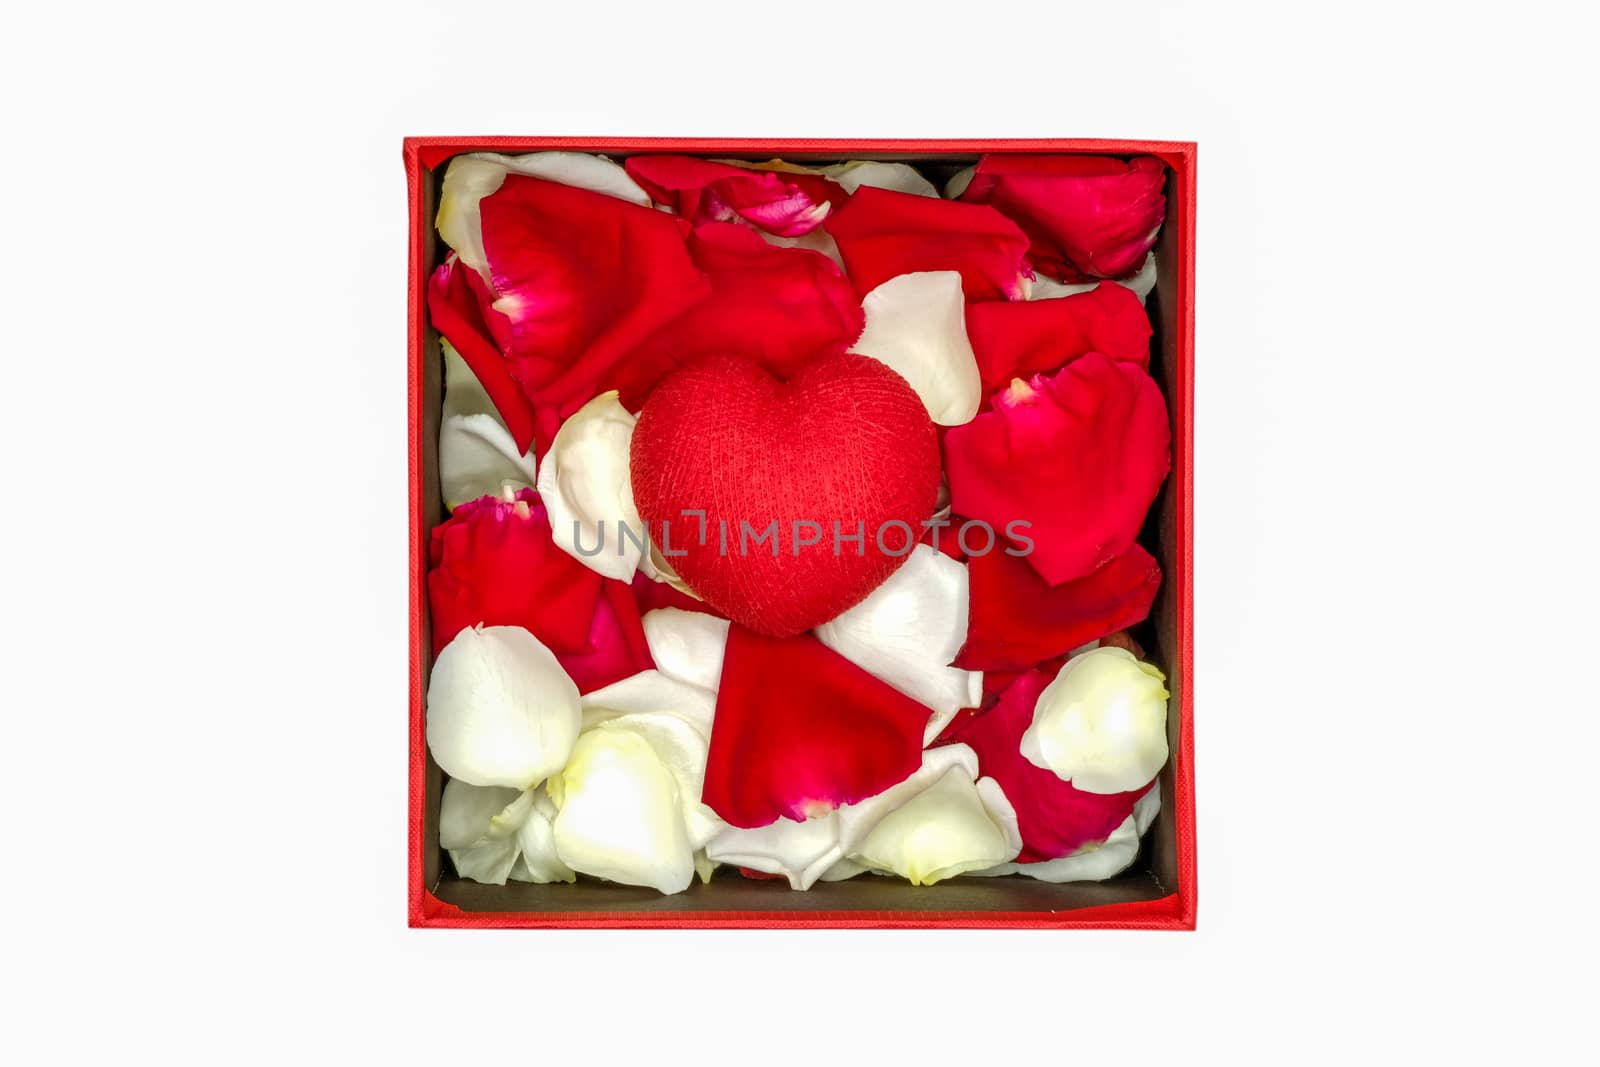 a handmade paper heart and rose petals in a paper box by Nawoot